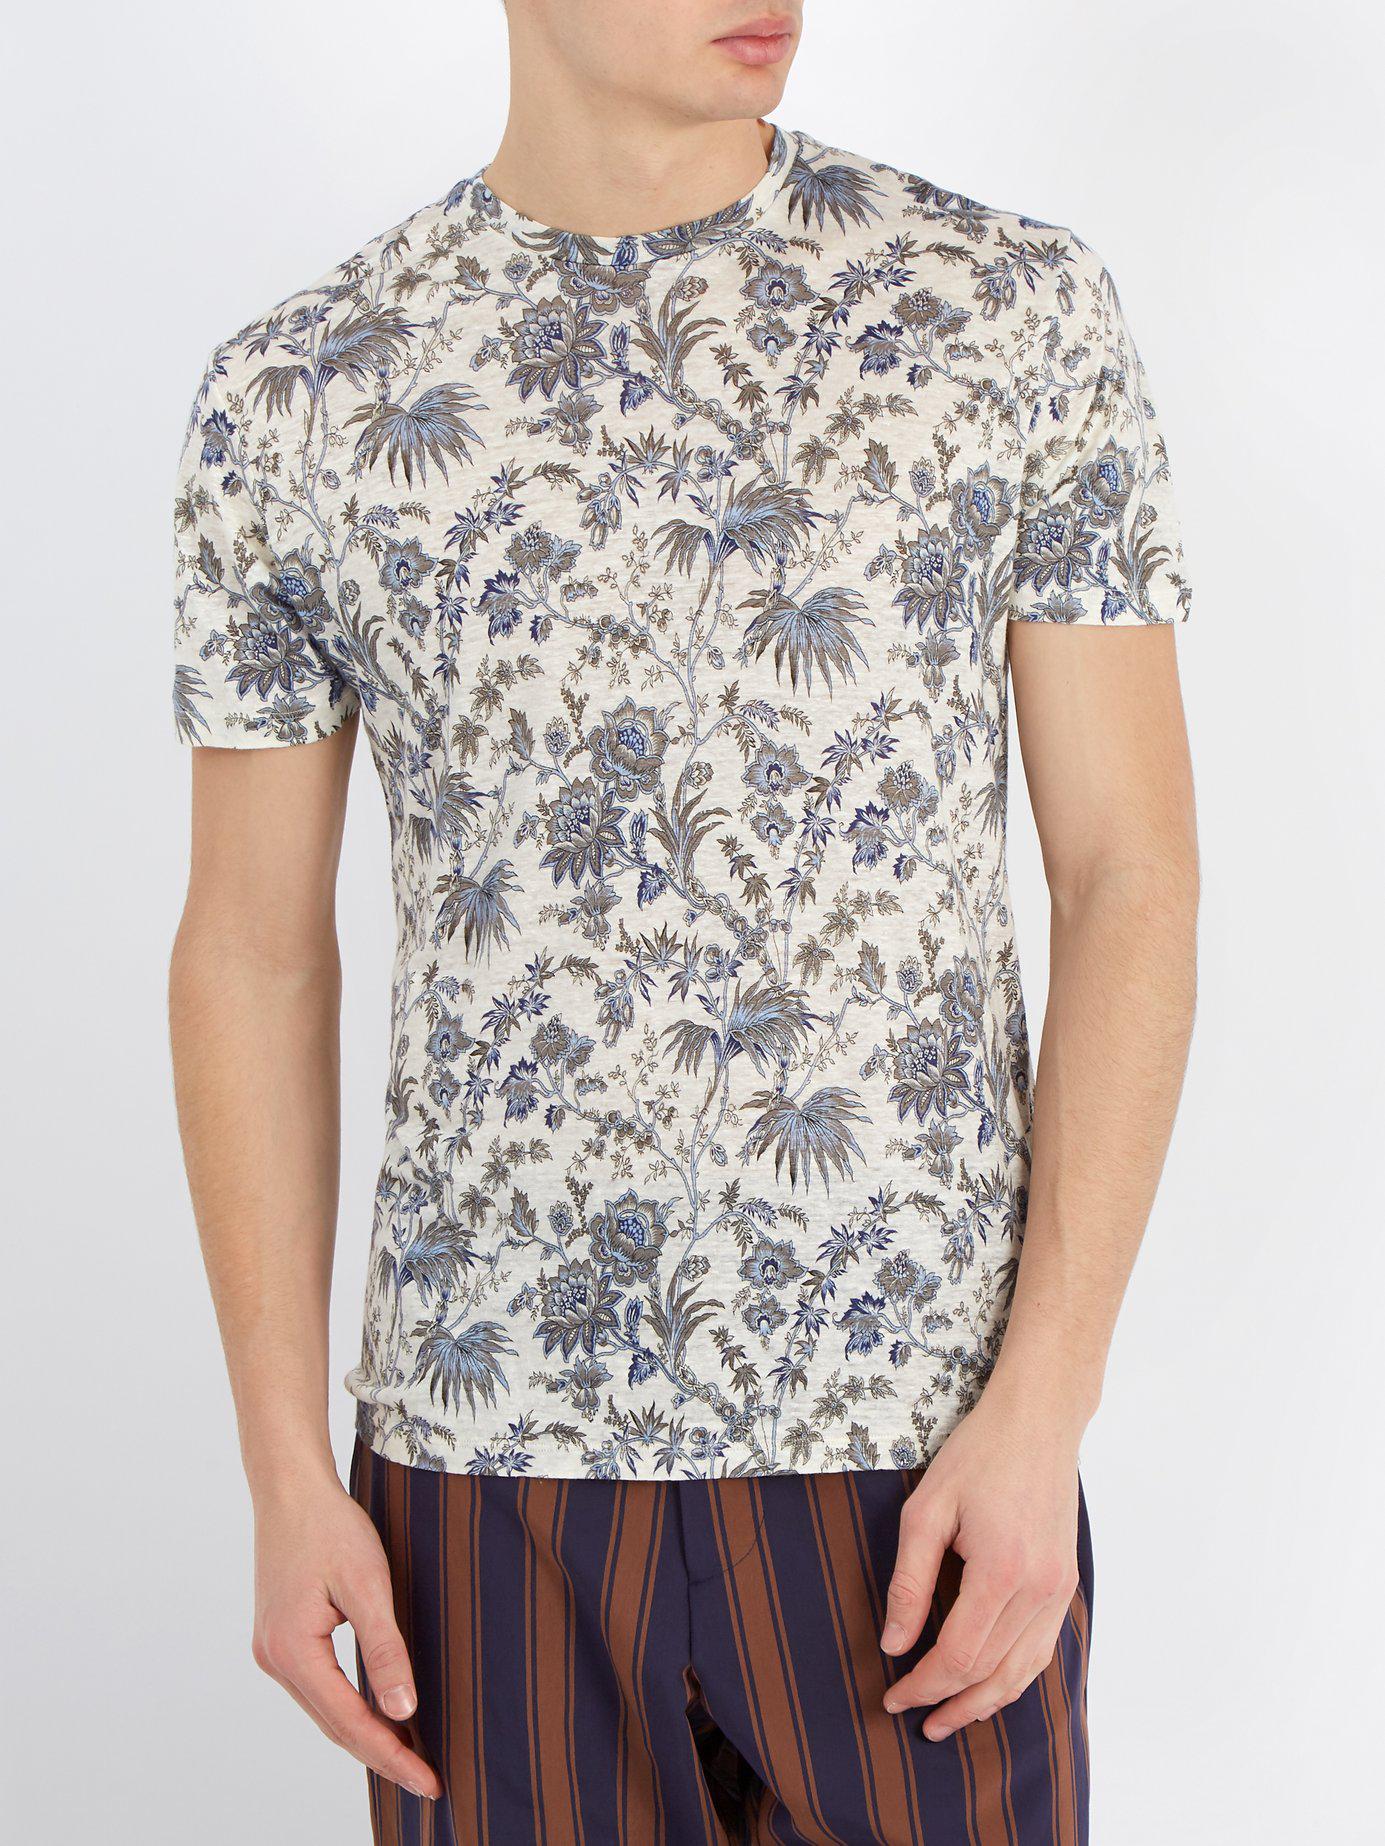 Etro Floral-print Linen-jersey T-shirt in White for Men - Lyst